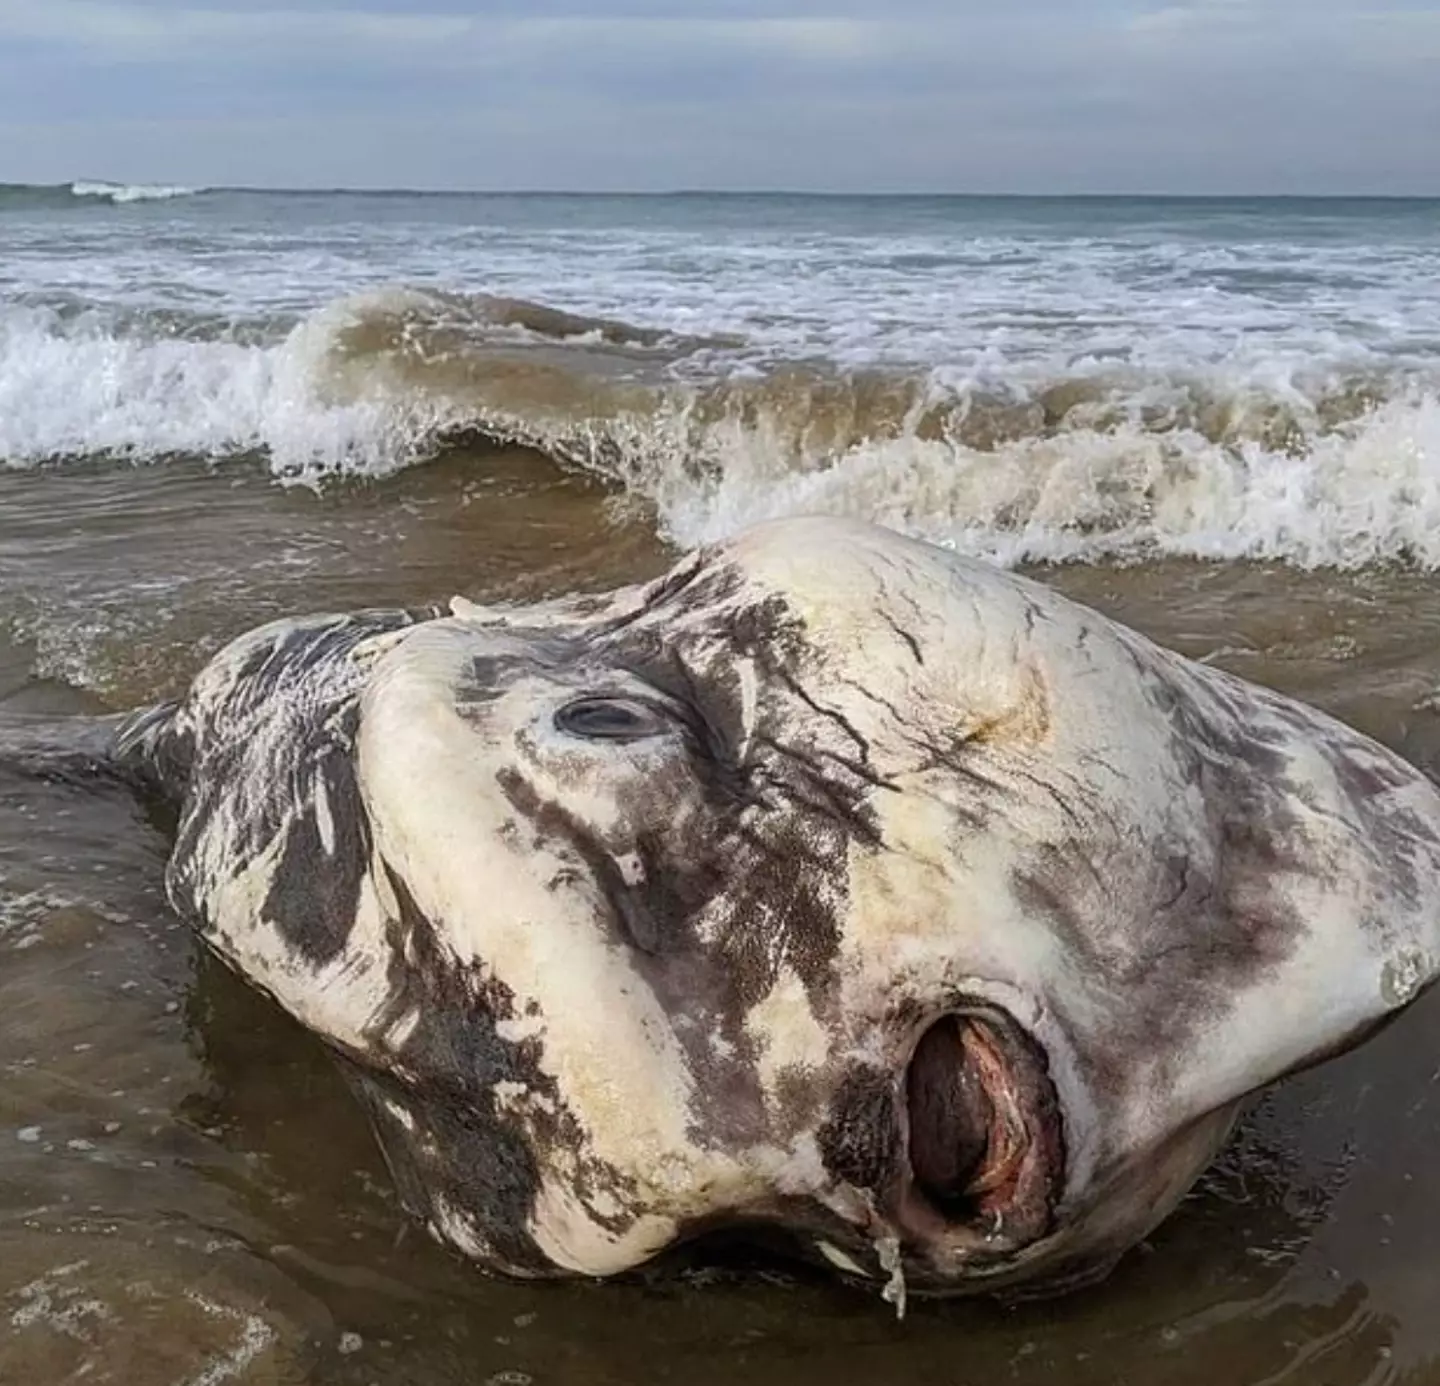 The giant fish was found on a beach in Australia.